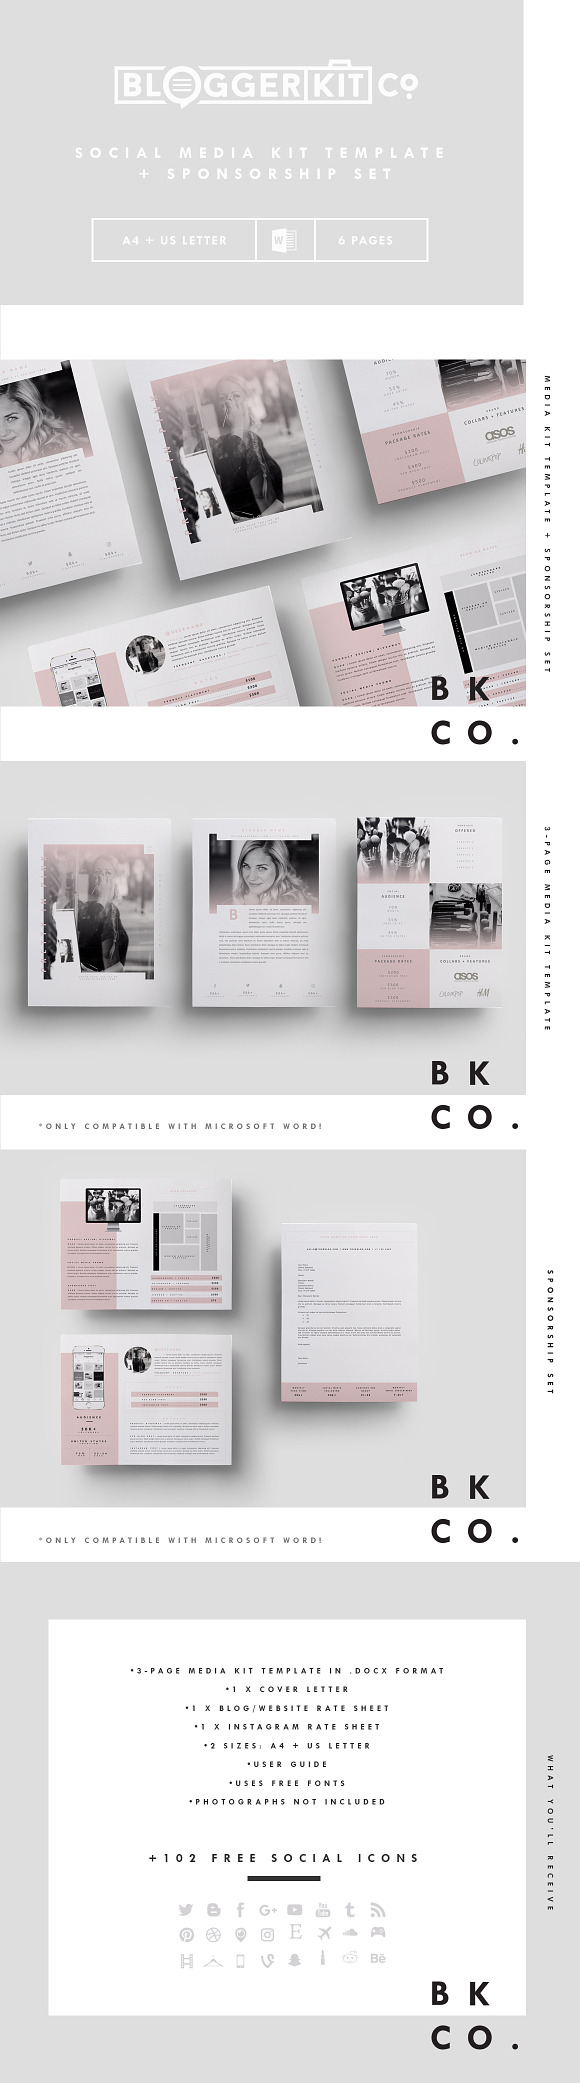 Social Media Kit Template Set | 6Pgs in Instagram Templates - product preview 4